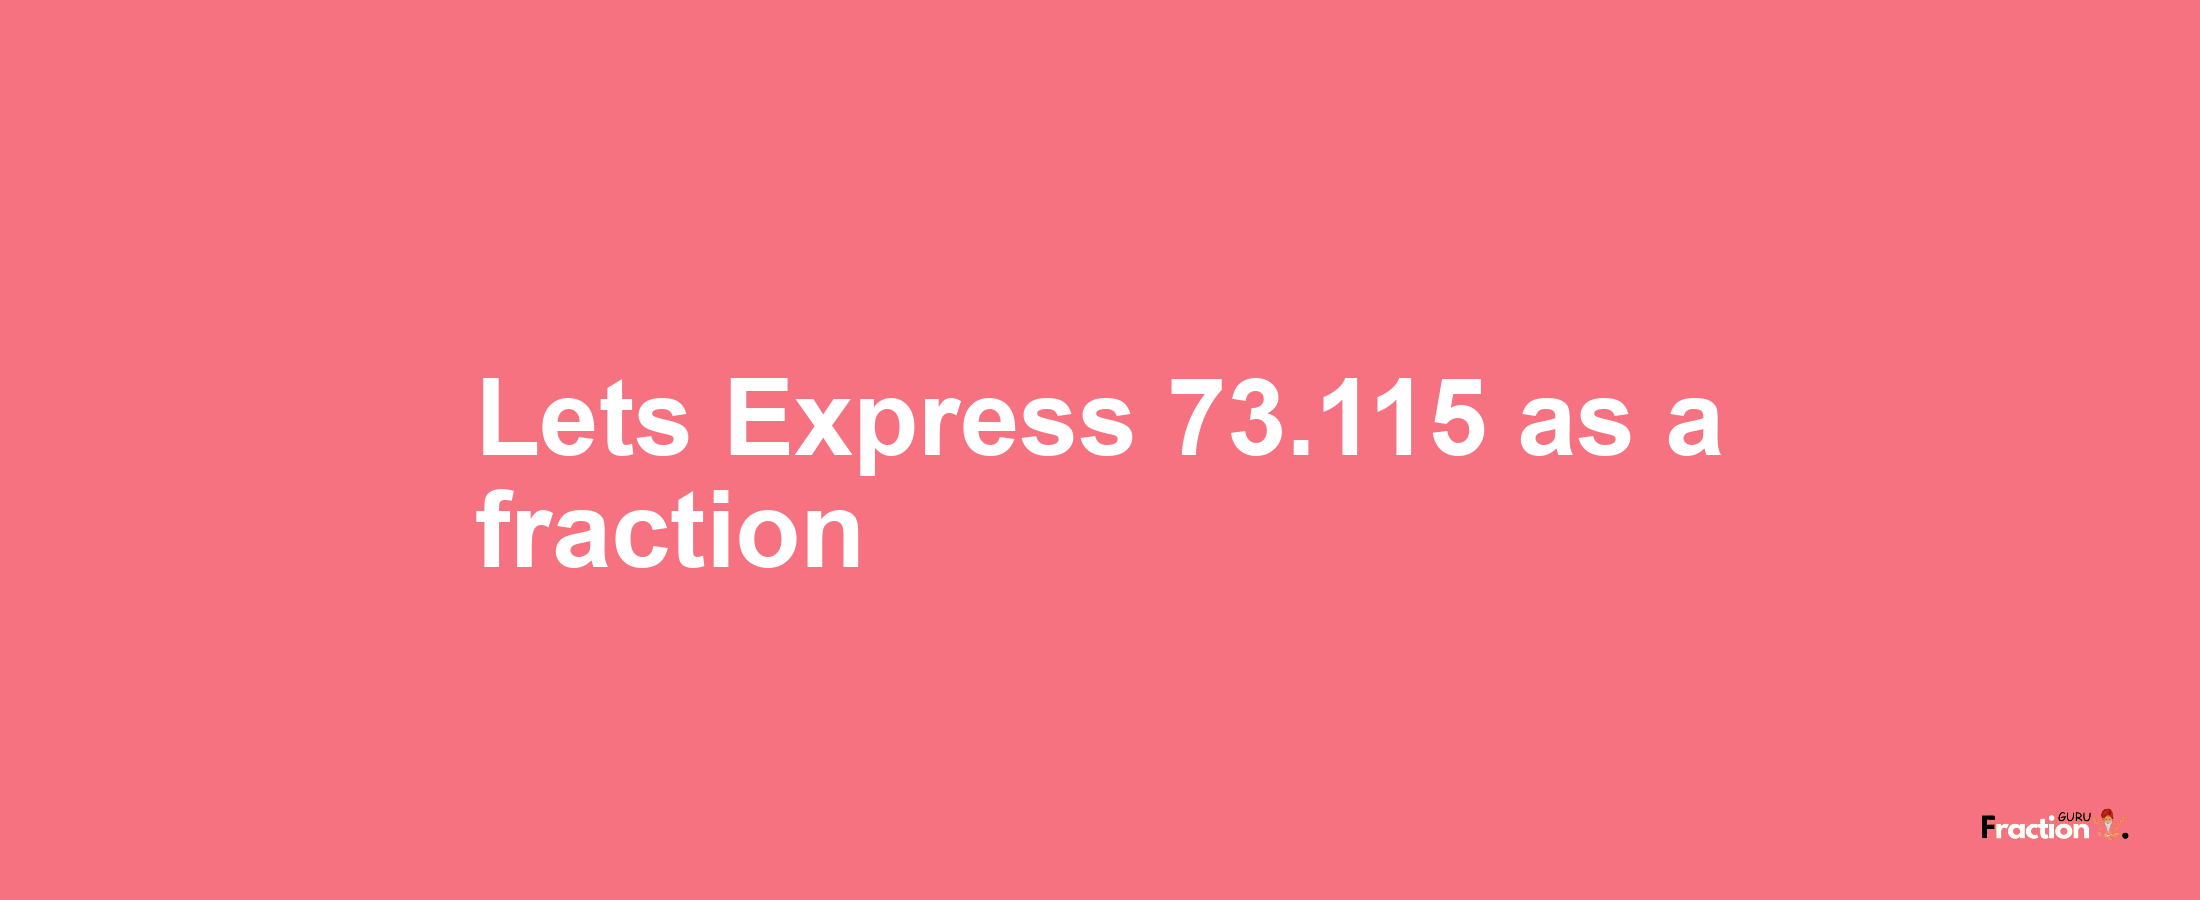 Lets Express 73.115 as afraction